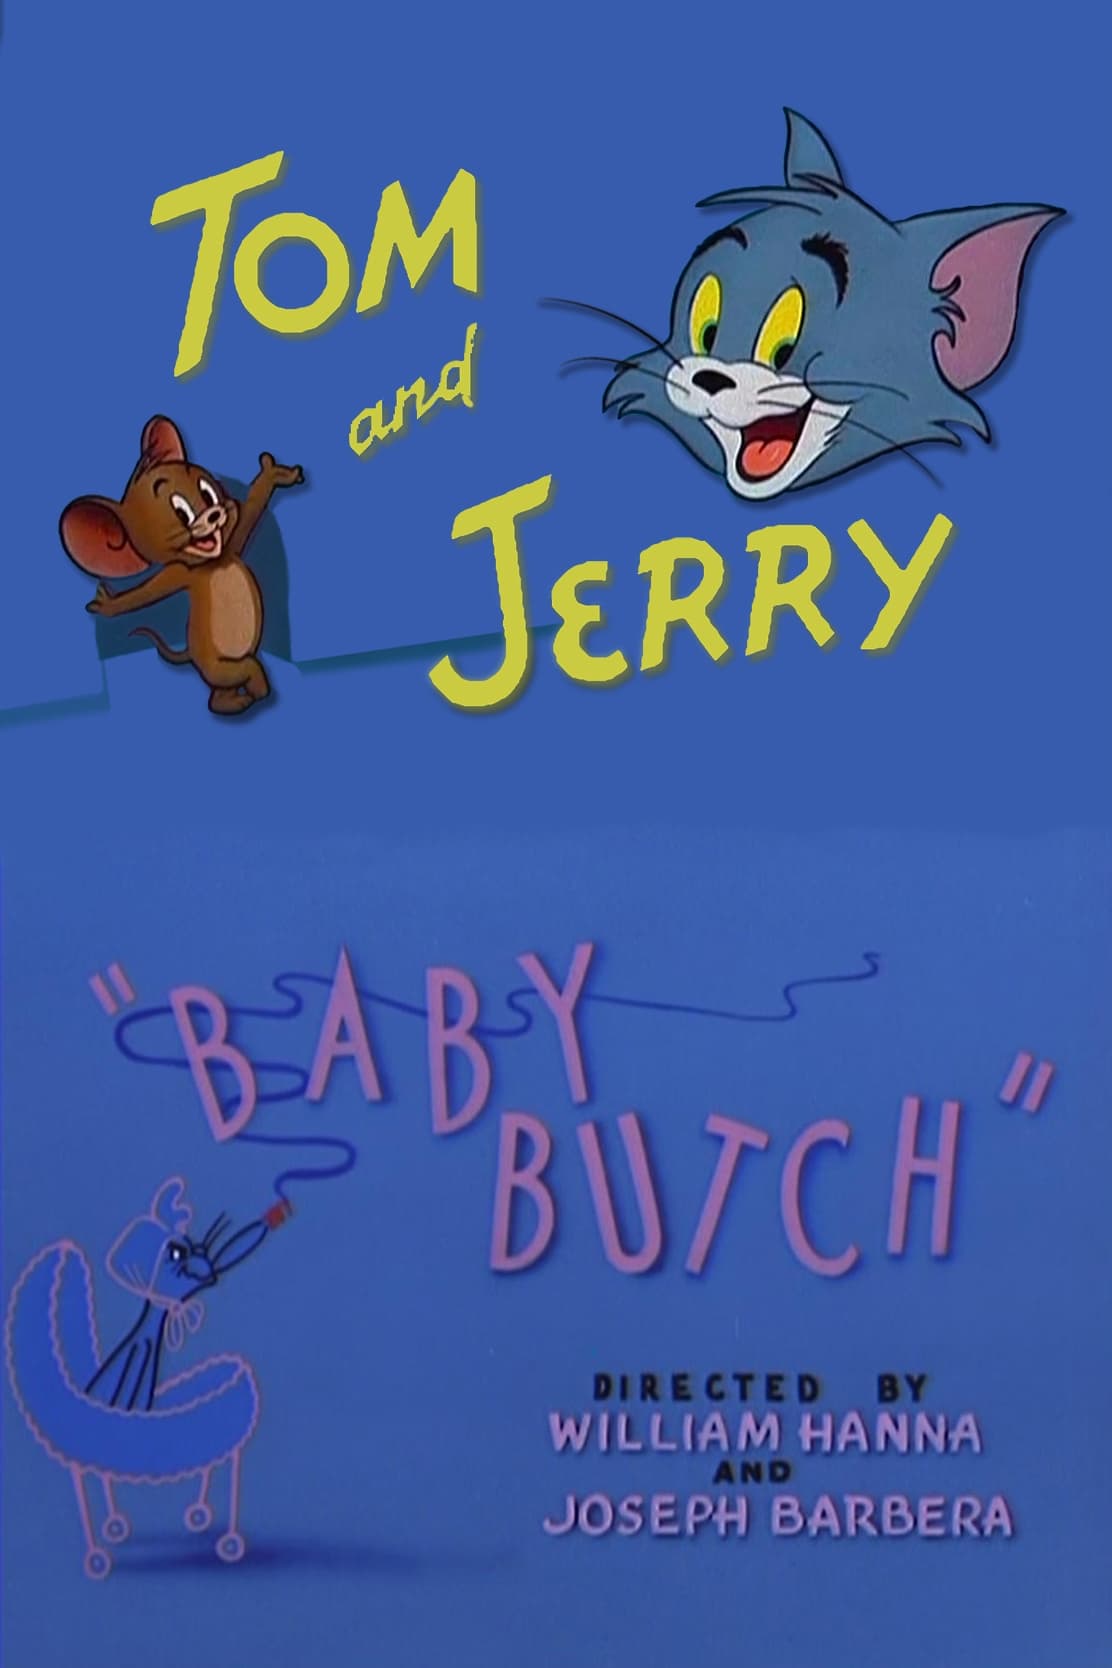 Baby Butch (1954)